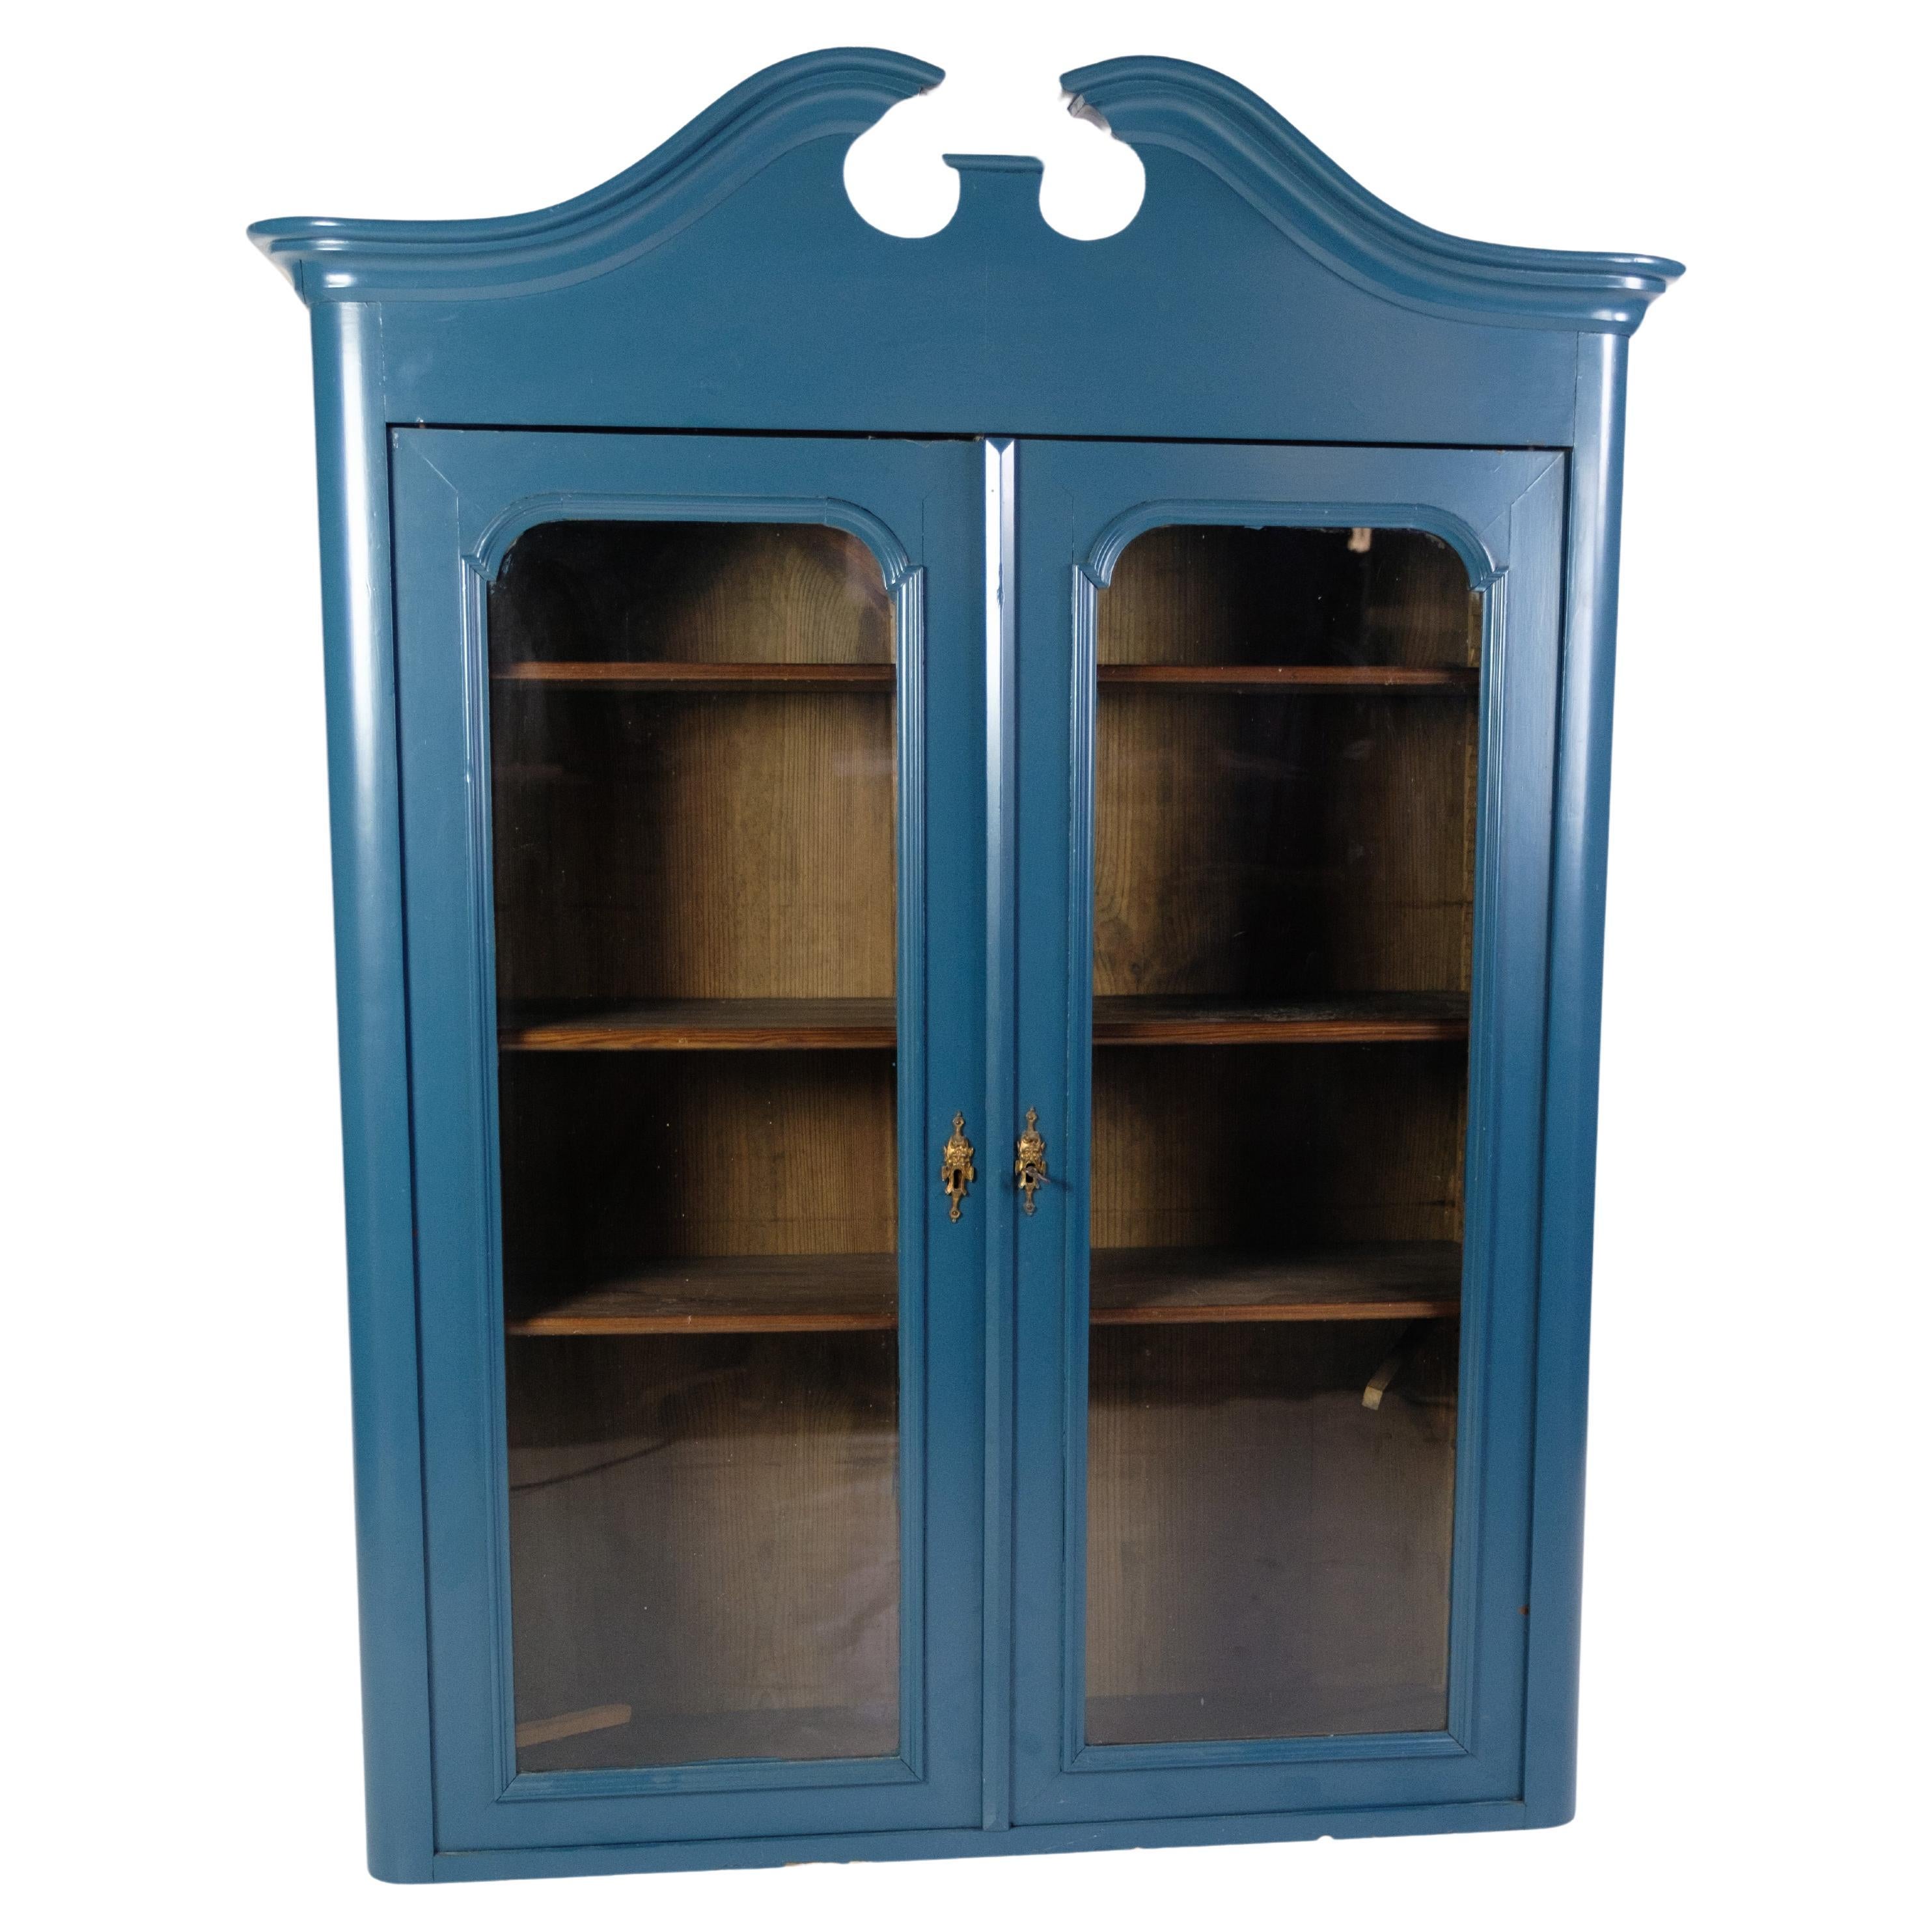 Antique Display Cabinet/Vitrine Painted In Blue From 1920s